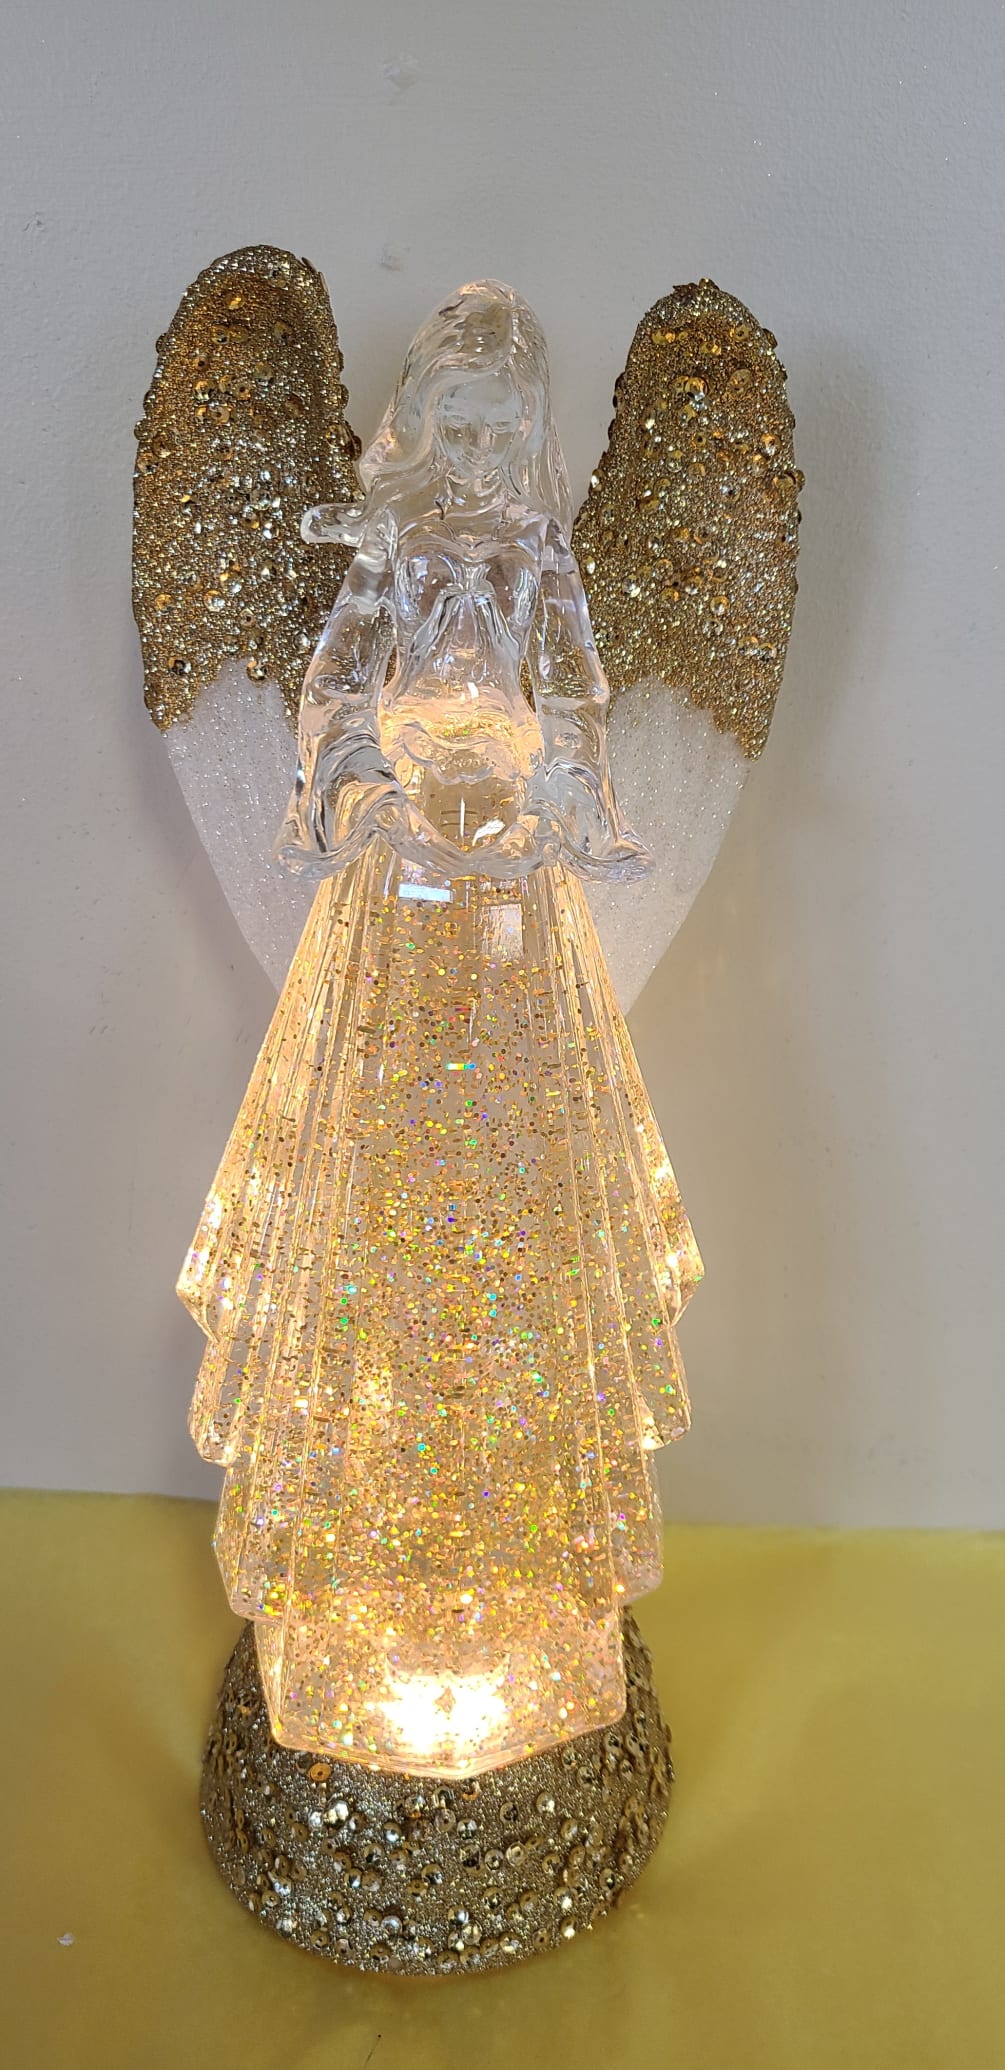 This Gold Angel lights up with a motion of Glitter